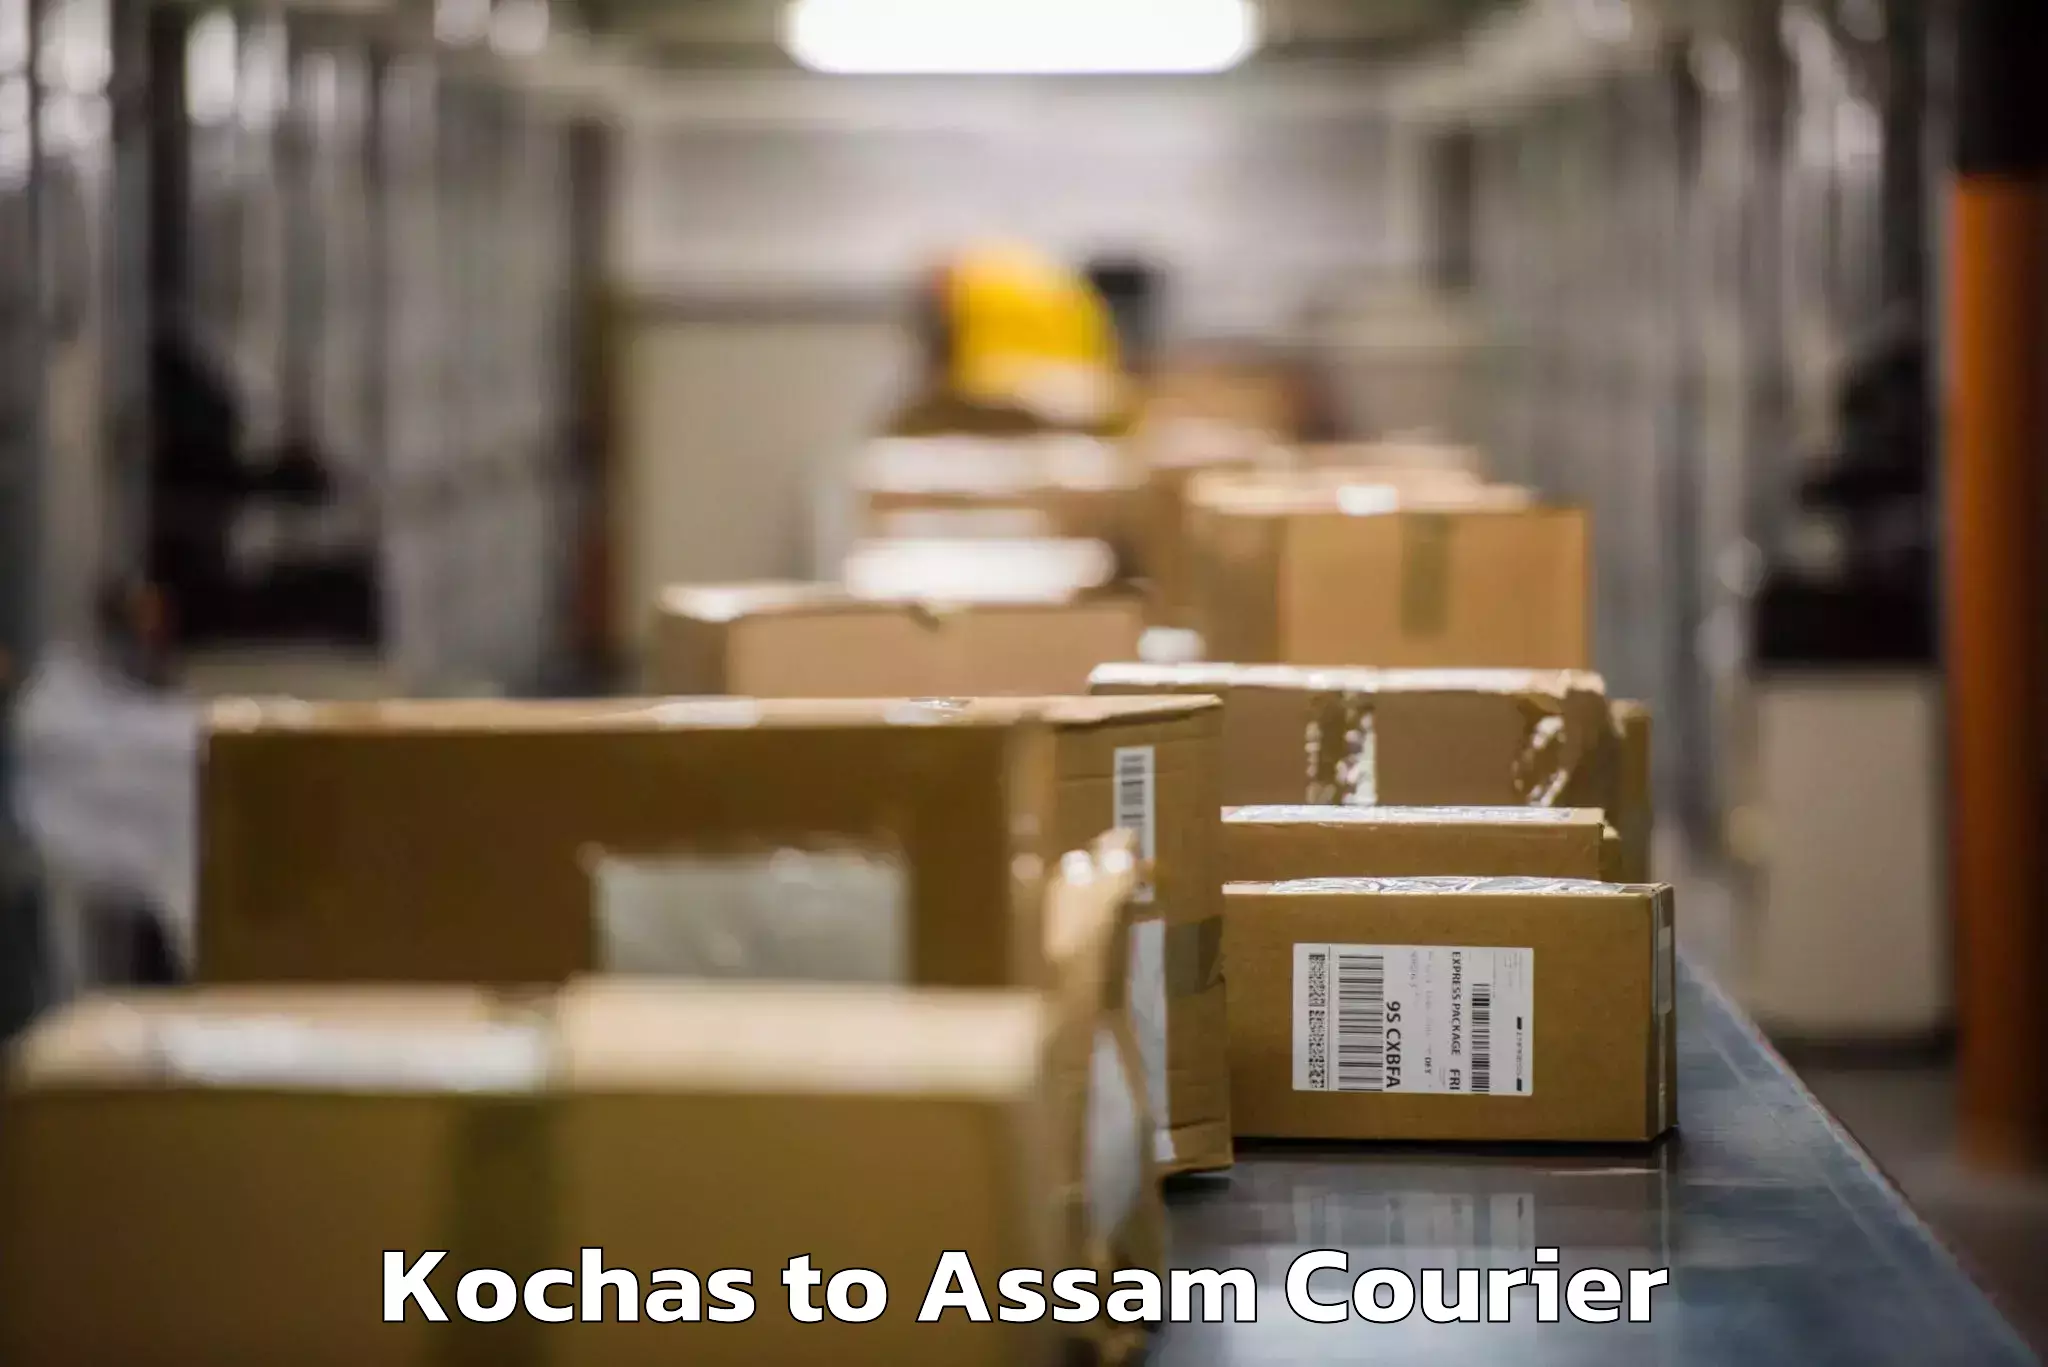 Baggage relocation service Kochas to Assam